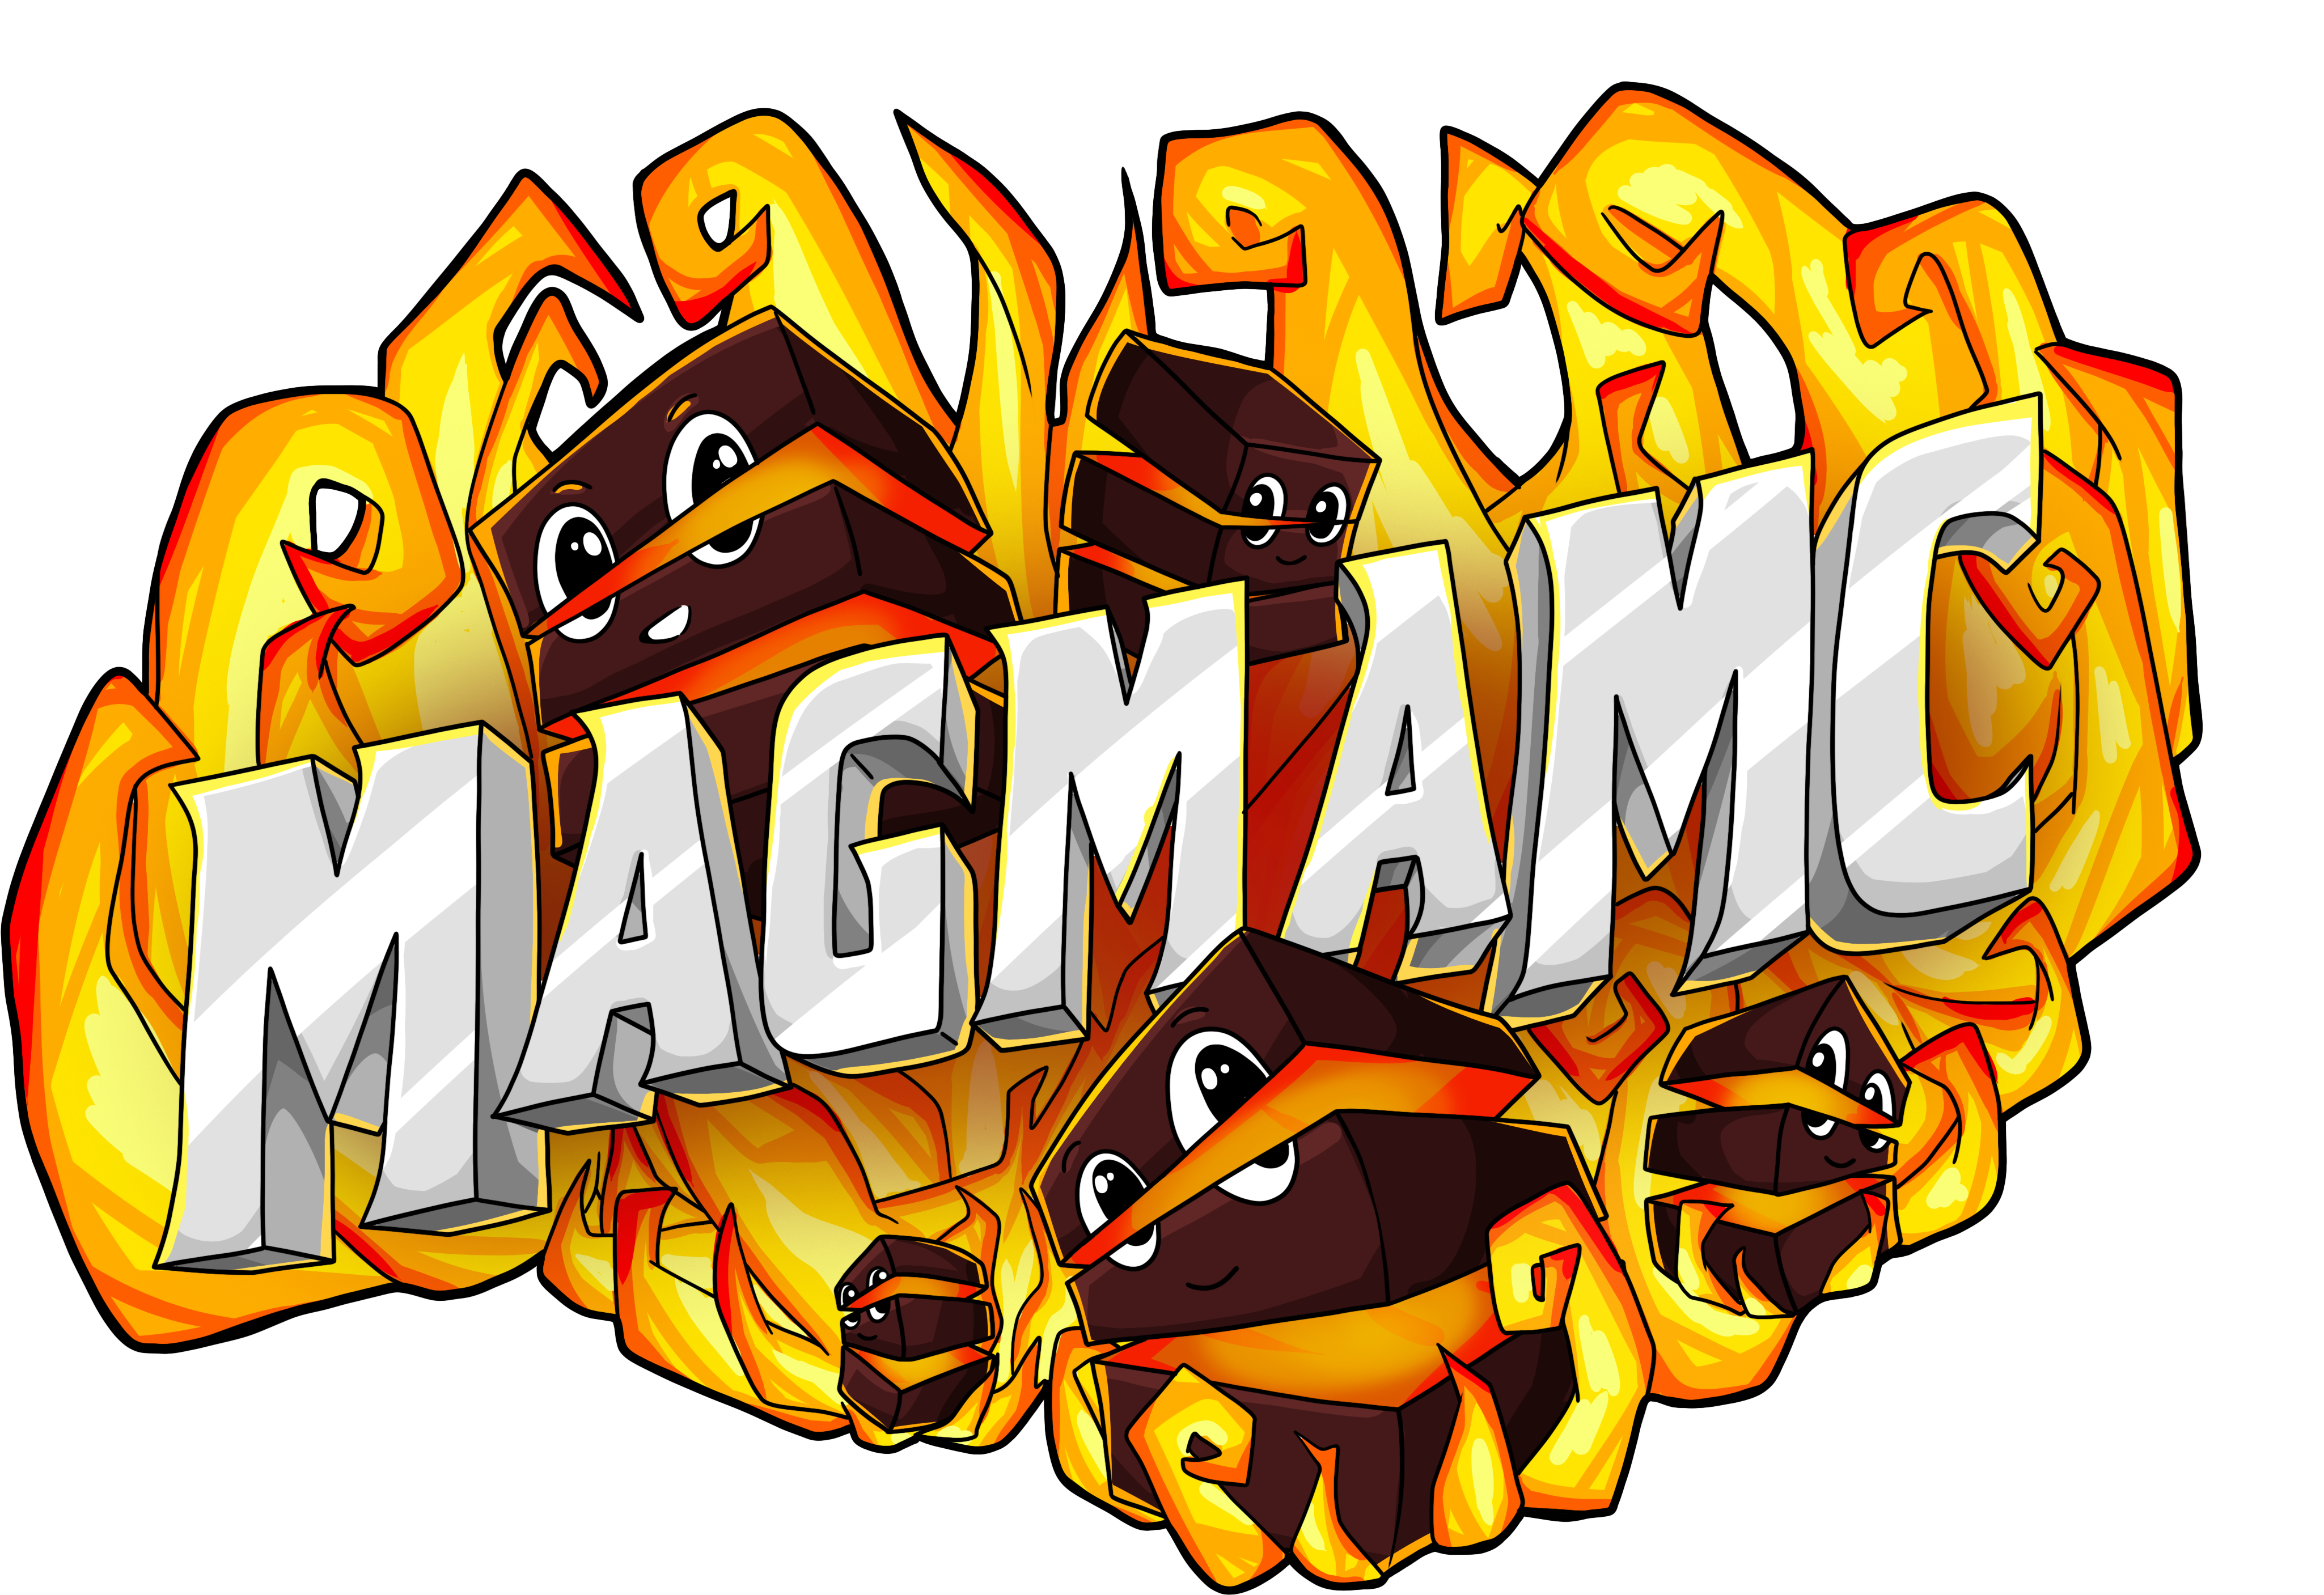 MagmaMC [SMP] 💎 | Java and Bedrock support - 1.17.1 Survival Minecraft Server